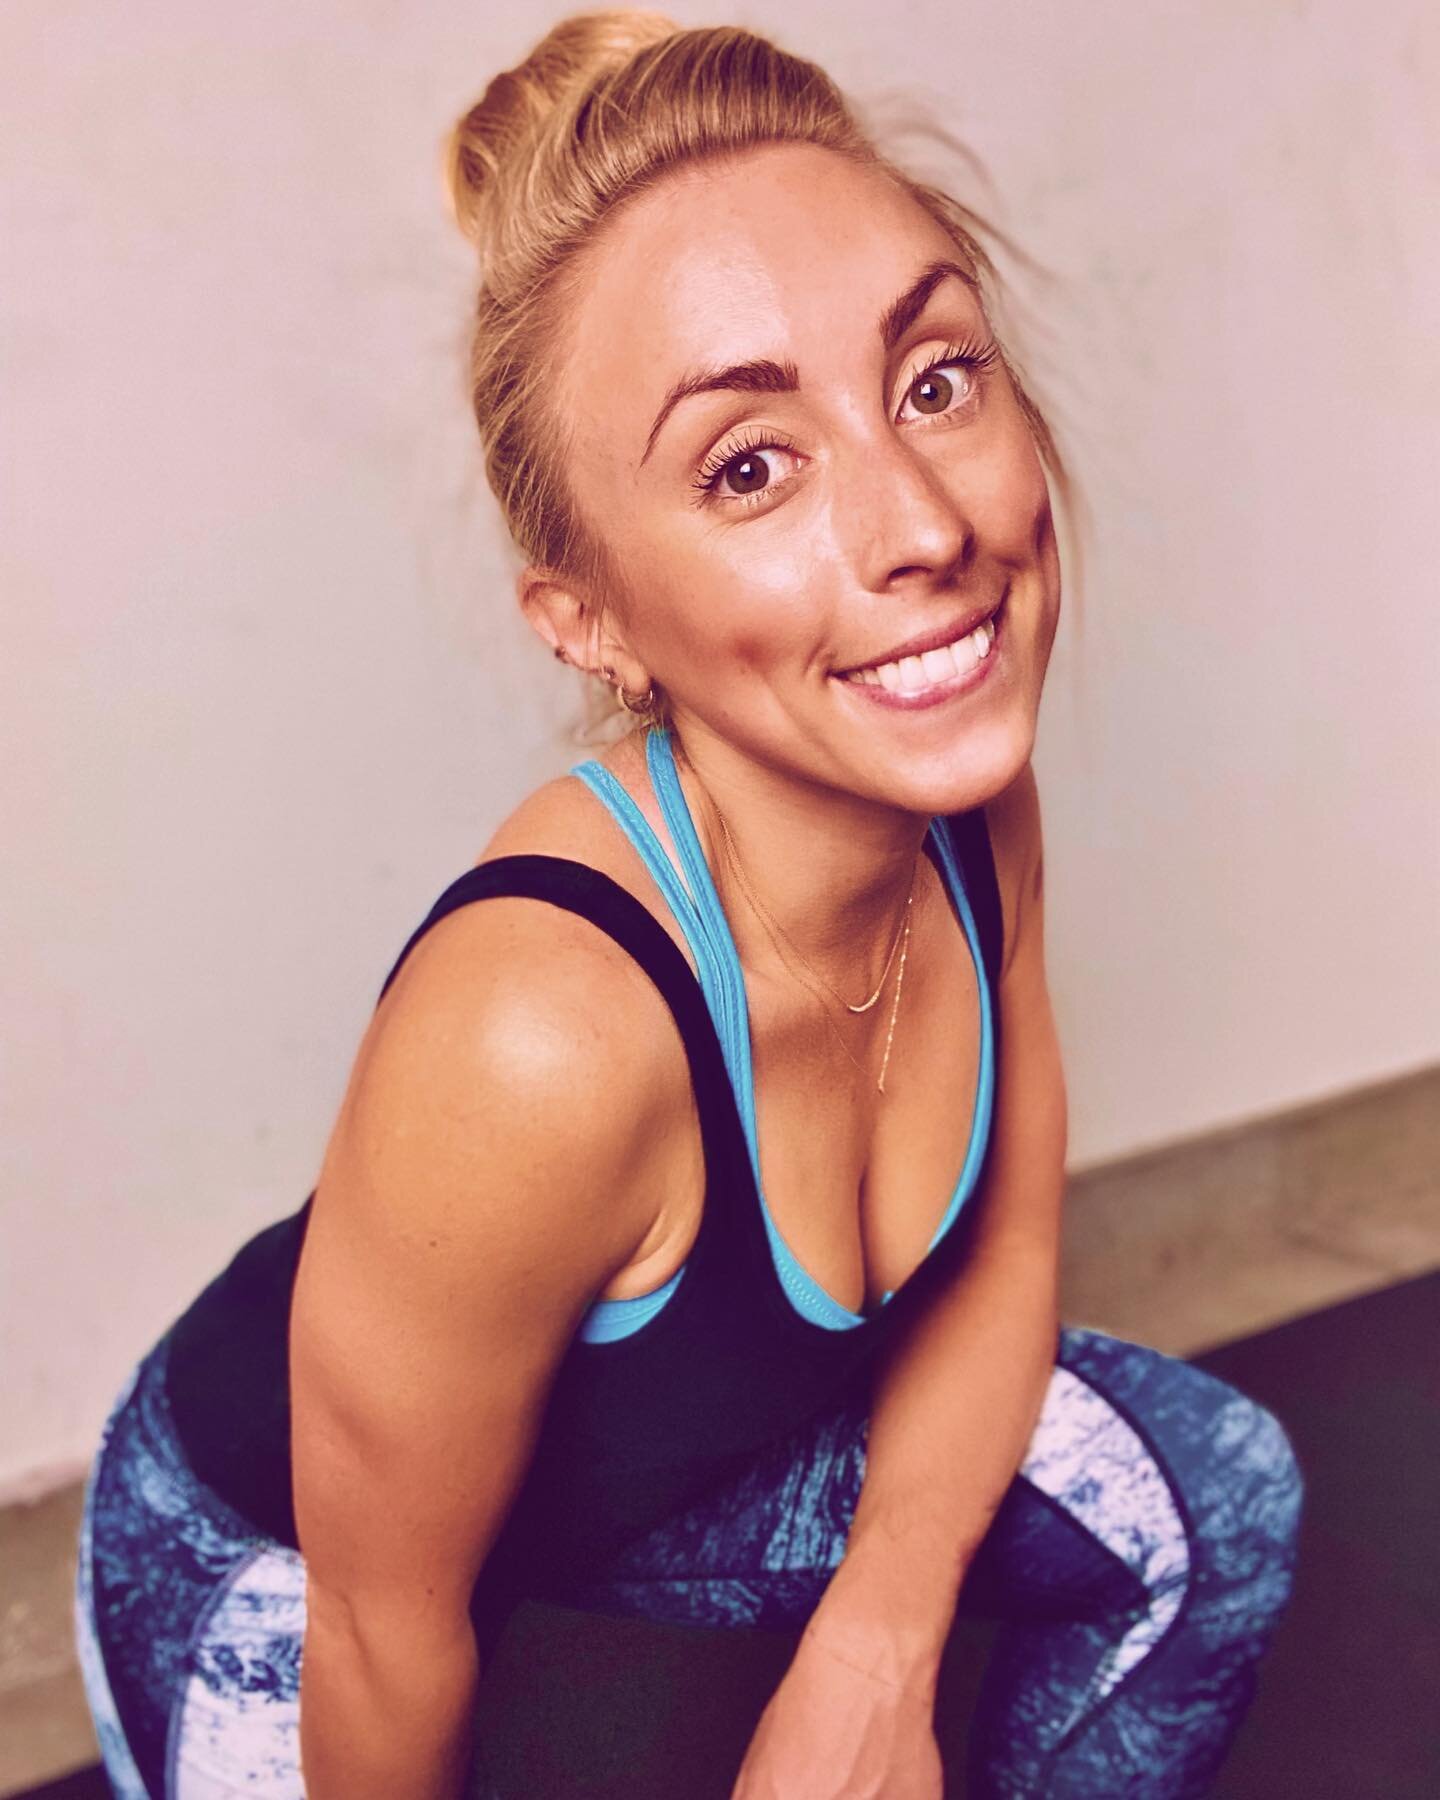 CHEESIN 😁 thinking about how lucky I was to have so many positive experiences with physical activity/exercise growing up. Moving regularly *and in ways I enjoy* has always been a part of my life.
🤸🏼&zwj;♀️Dancing was my first love
🏃🏼&zwj;♀️We ha